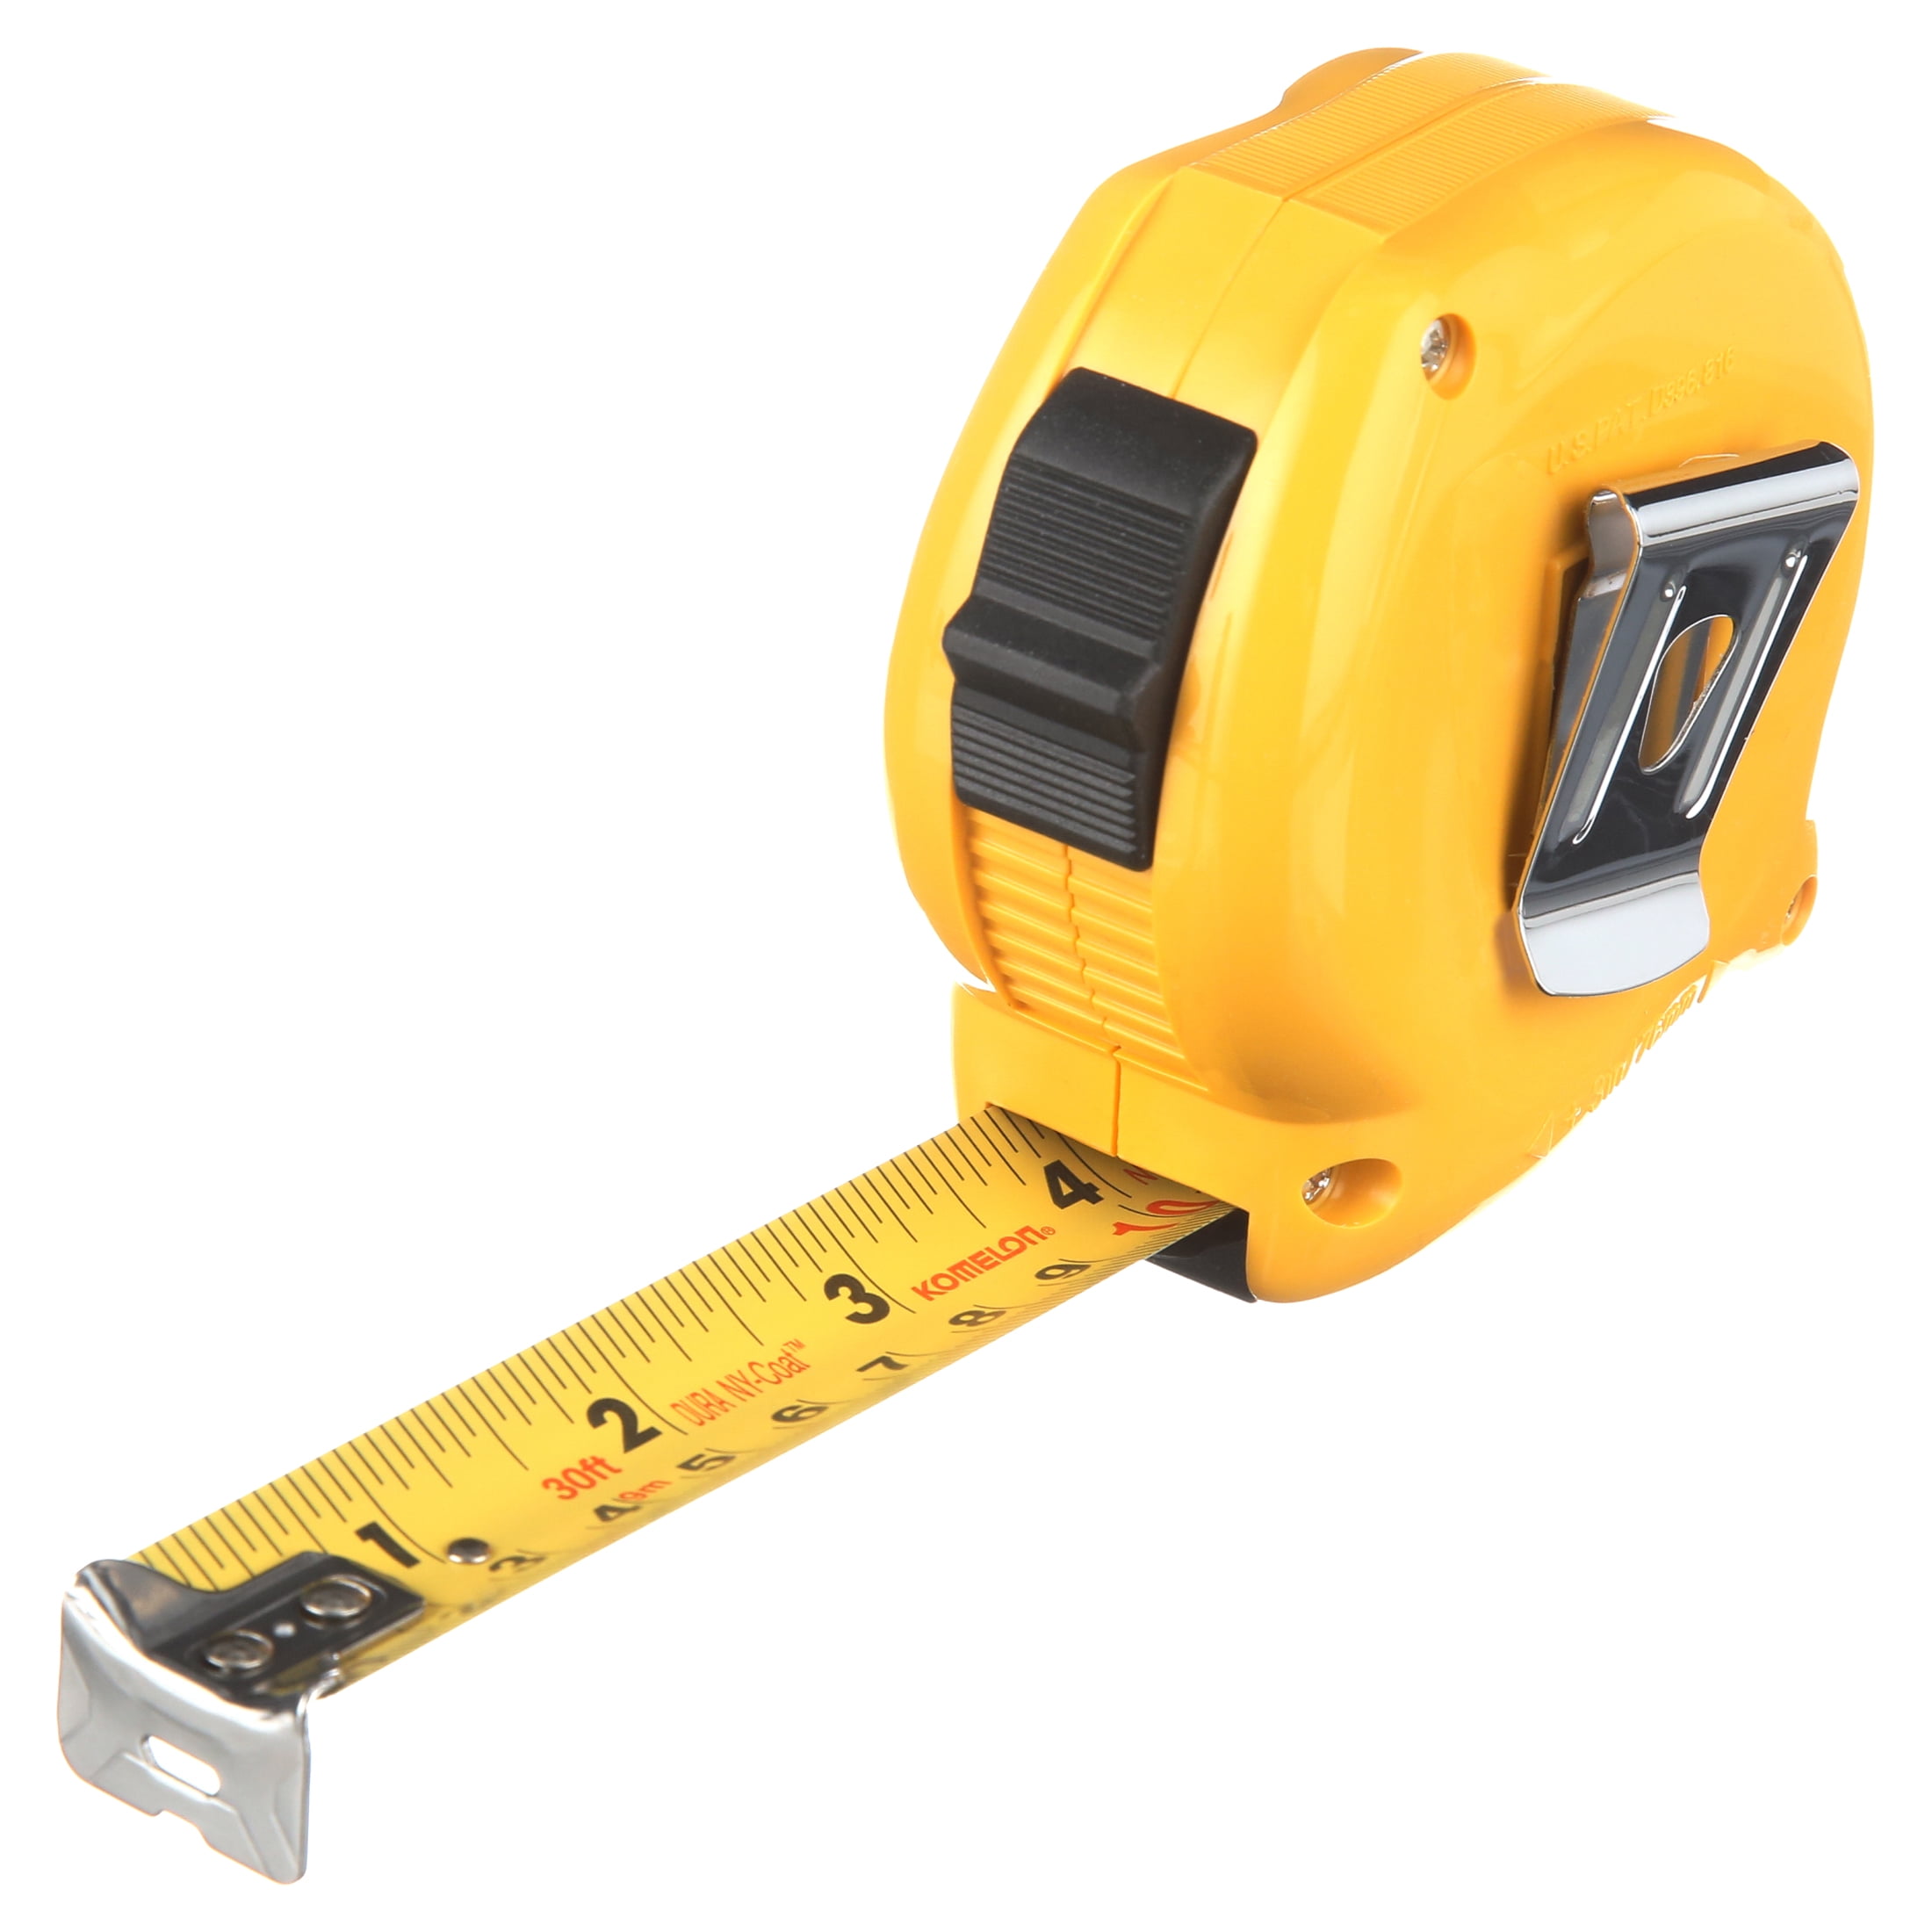 Measuring Tape, 30 m - SE-8712 - Products